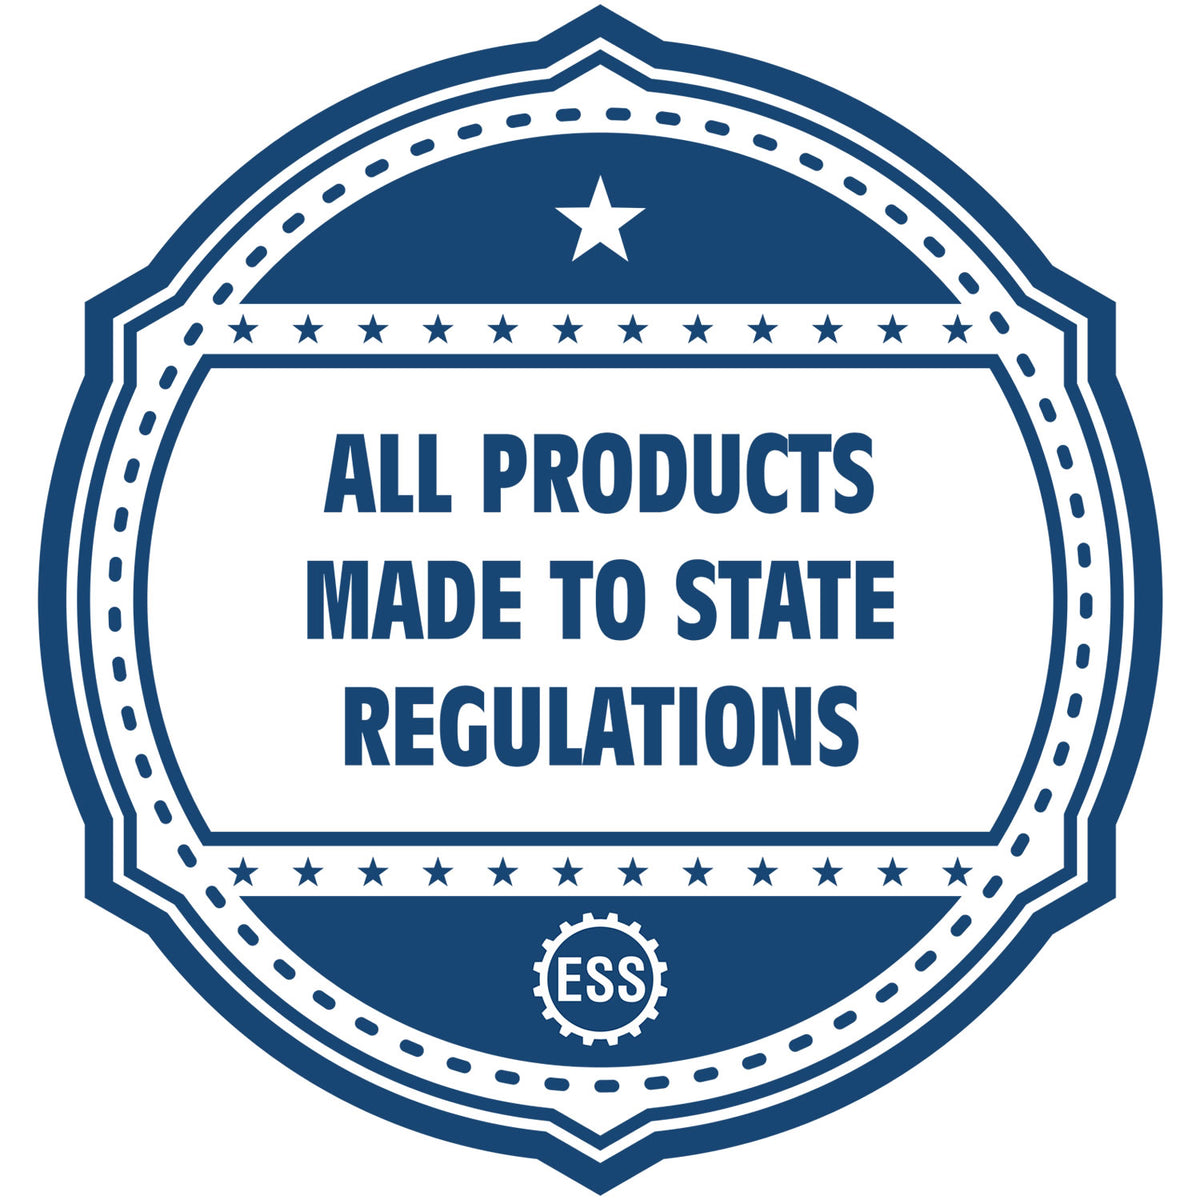 An icon or badge element for the Heavy Duty Cast Iron Georgia Land Surveyor Seal Embosser showing that this product is made in compliance with state regulations.